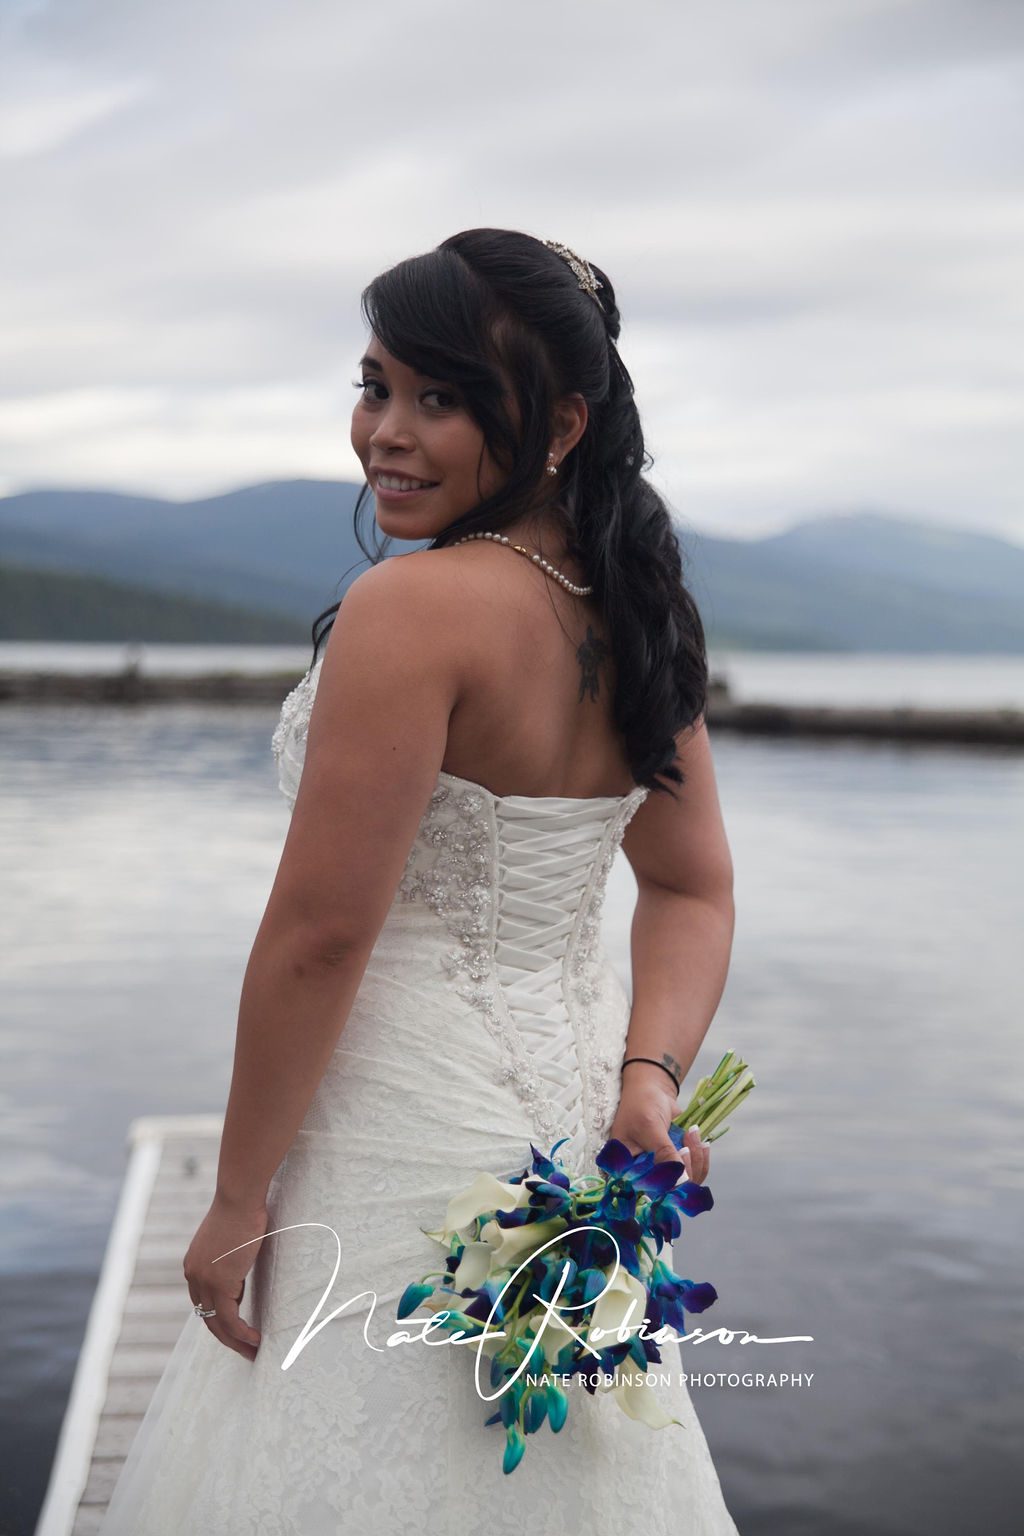 Bride in a white lace dress stands on a dock holding her blue bouquet zephyr lodge wedding